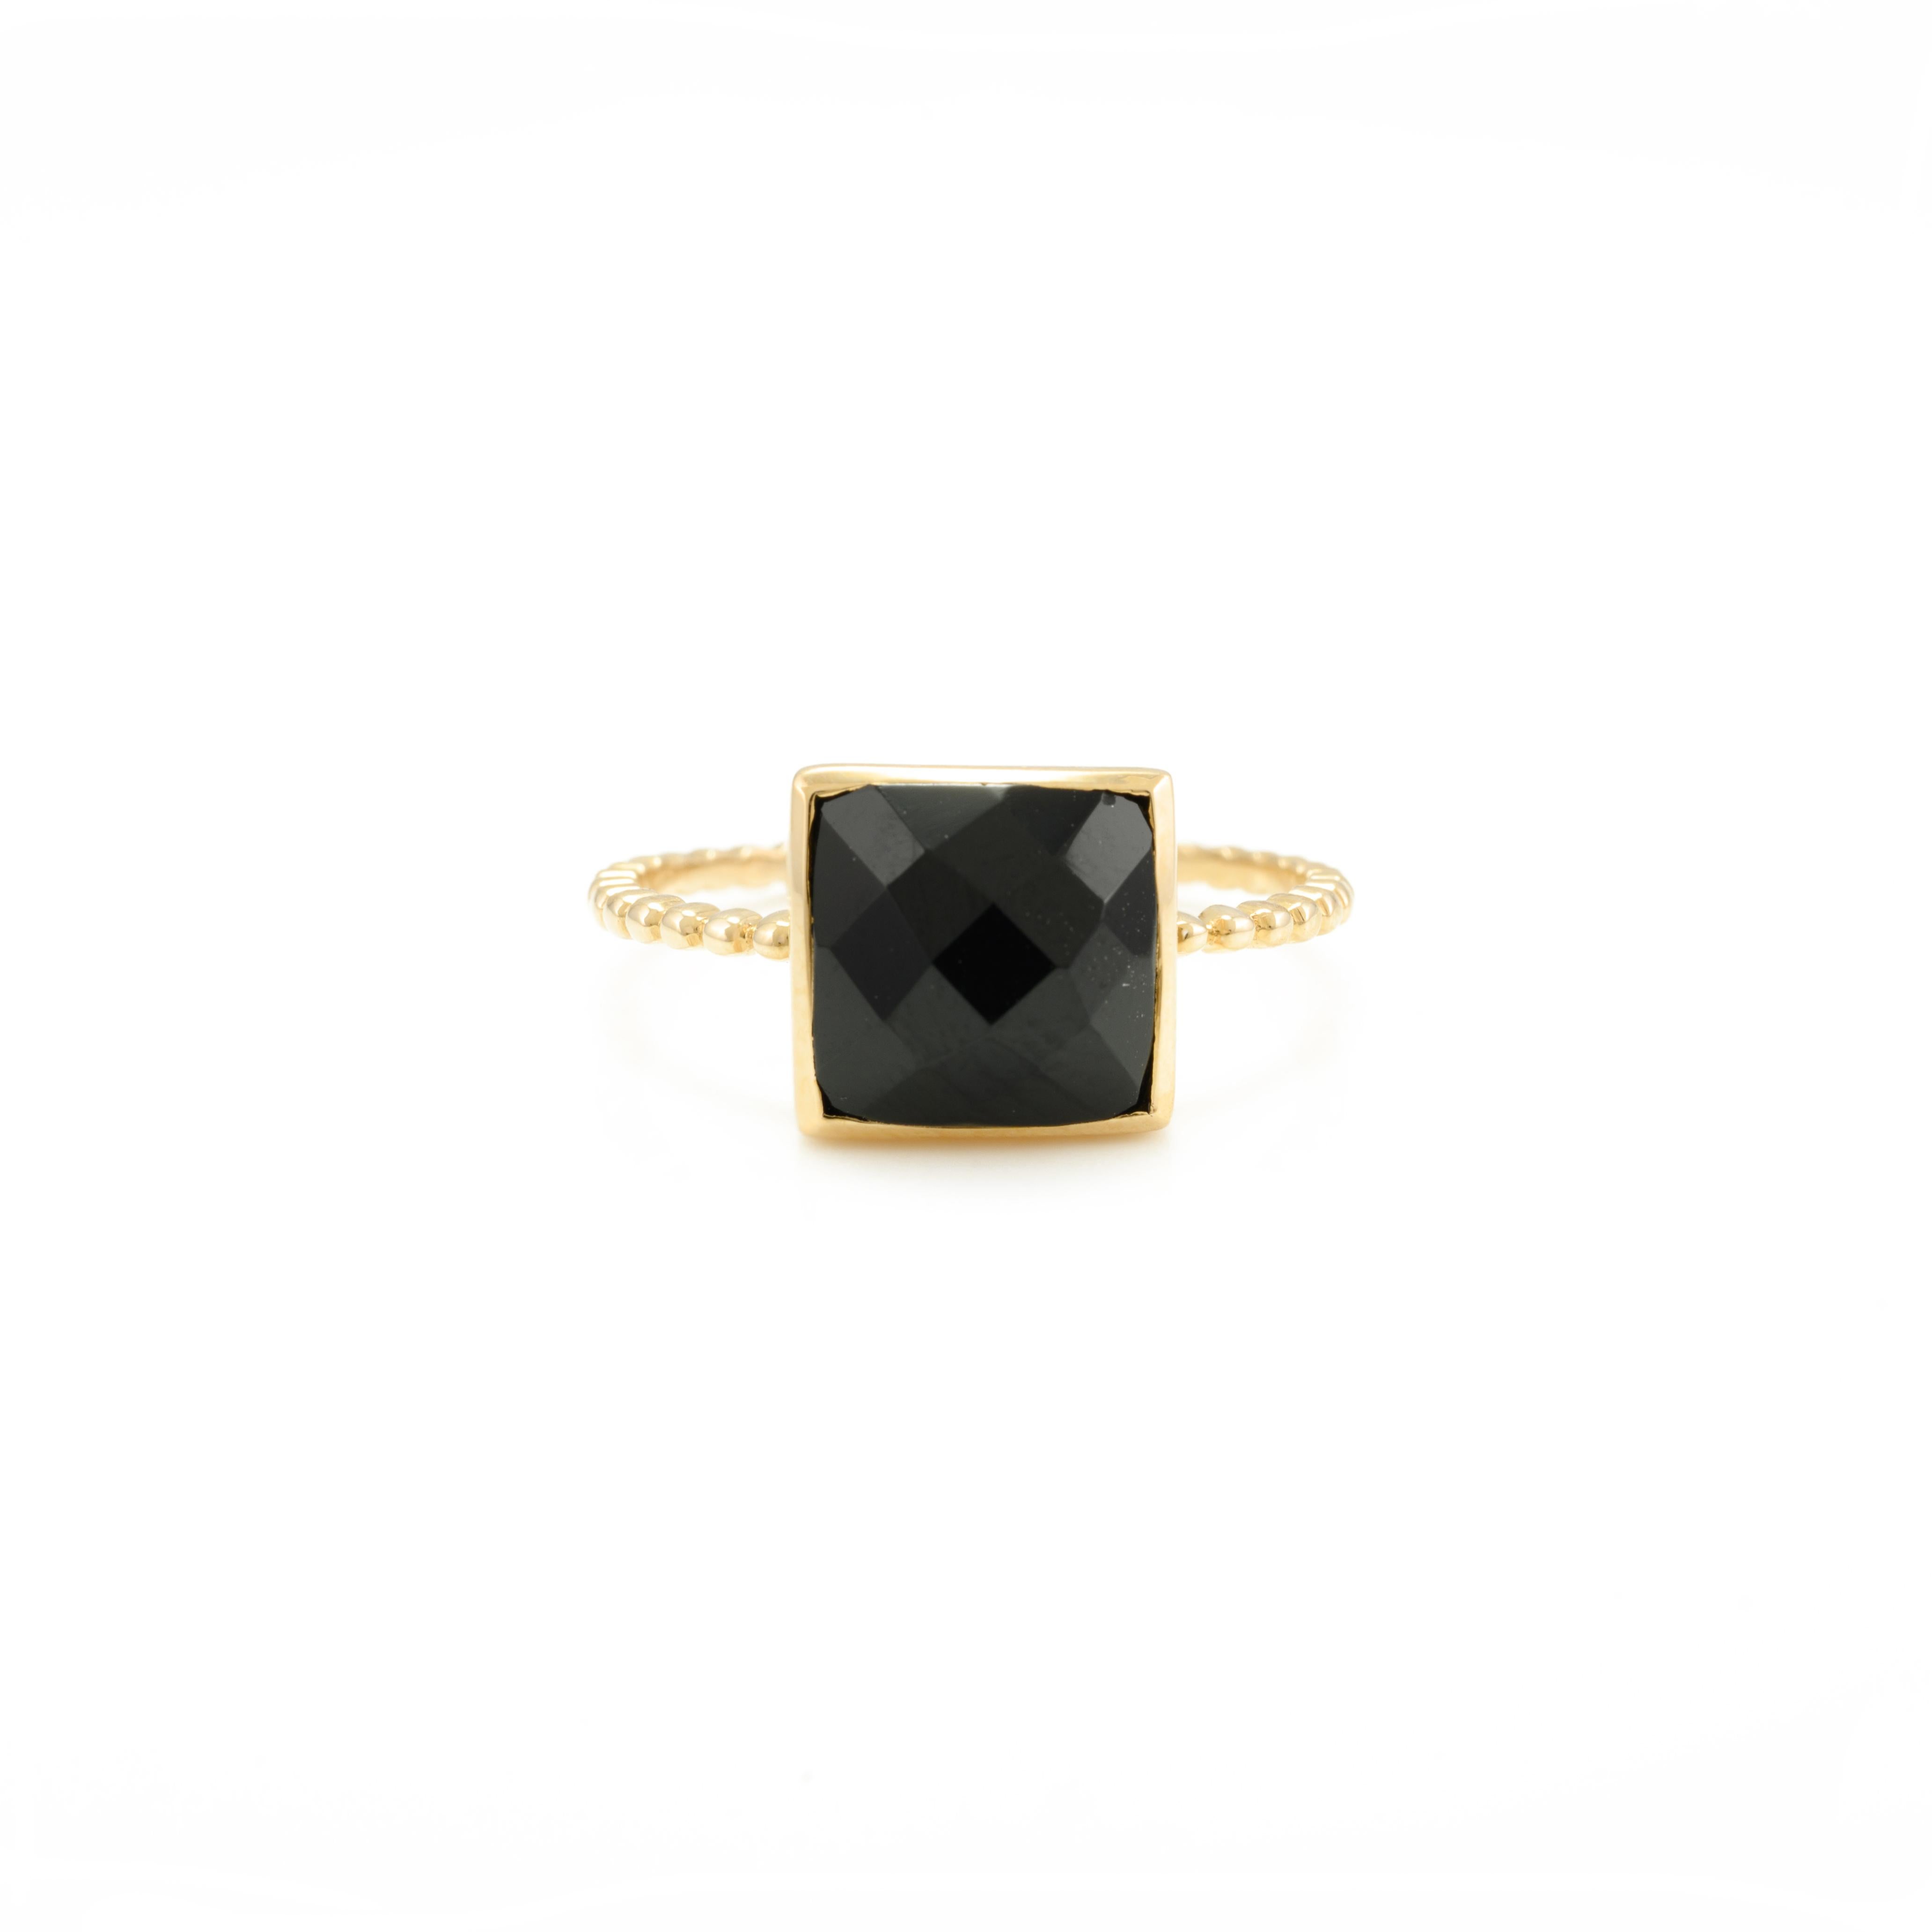 For Sale:  2.44 CTW Black Onyx Single Stone Ring in 14k Solid Yellow Gold 6